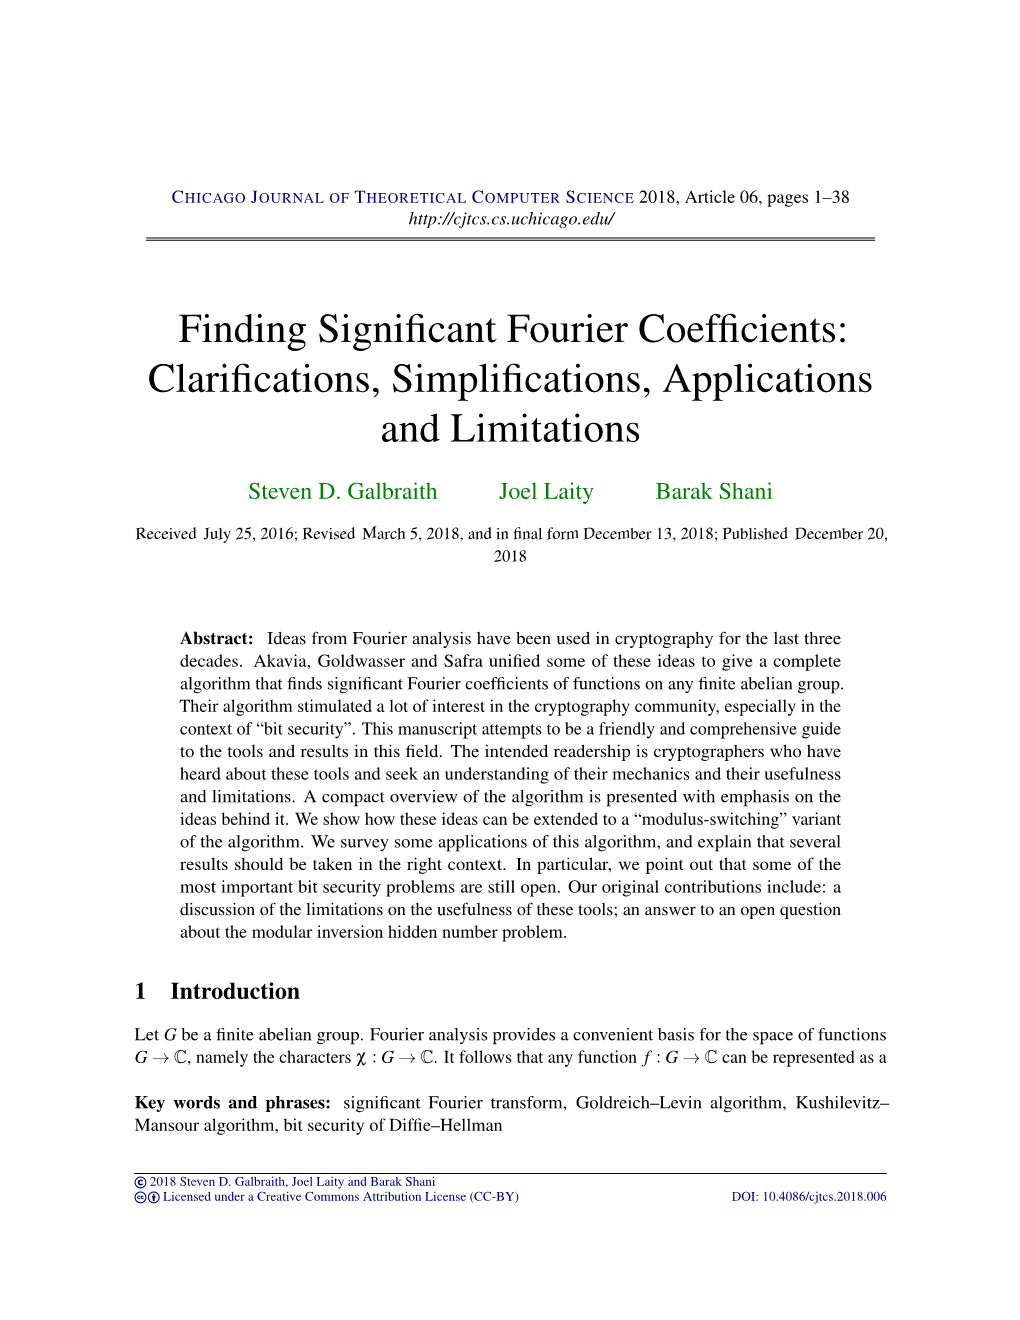 Finding Significant Fourier Coefficients